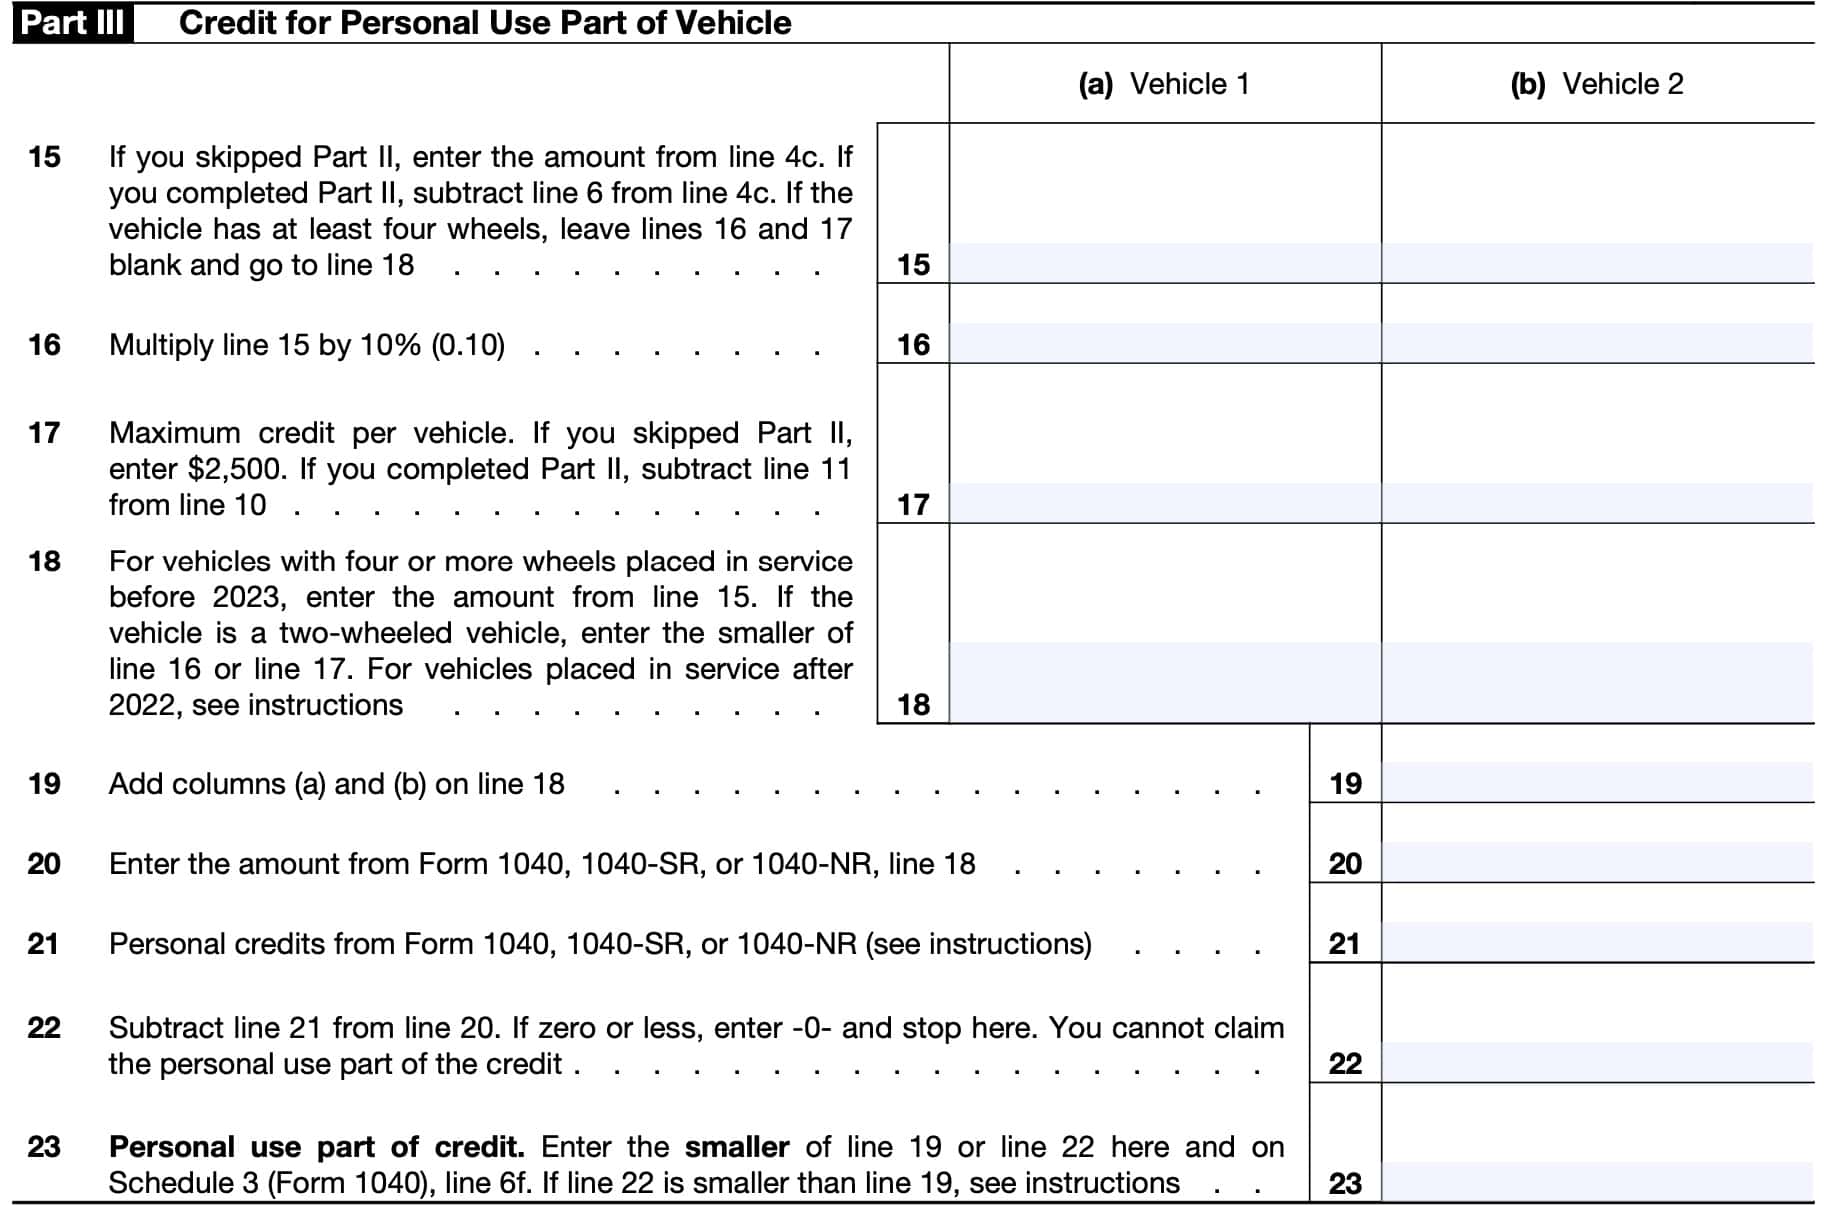 irs form 8936 part III: credit for personal use part of vehicle